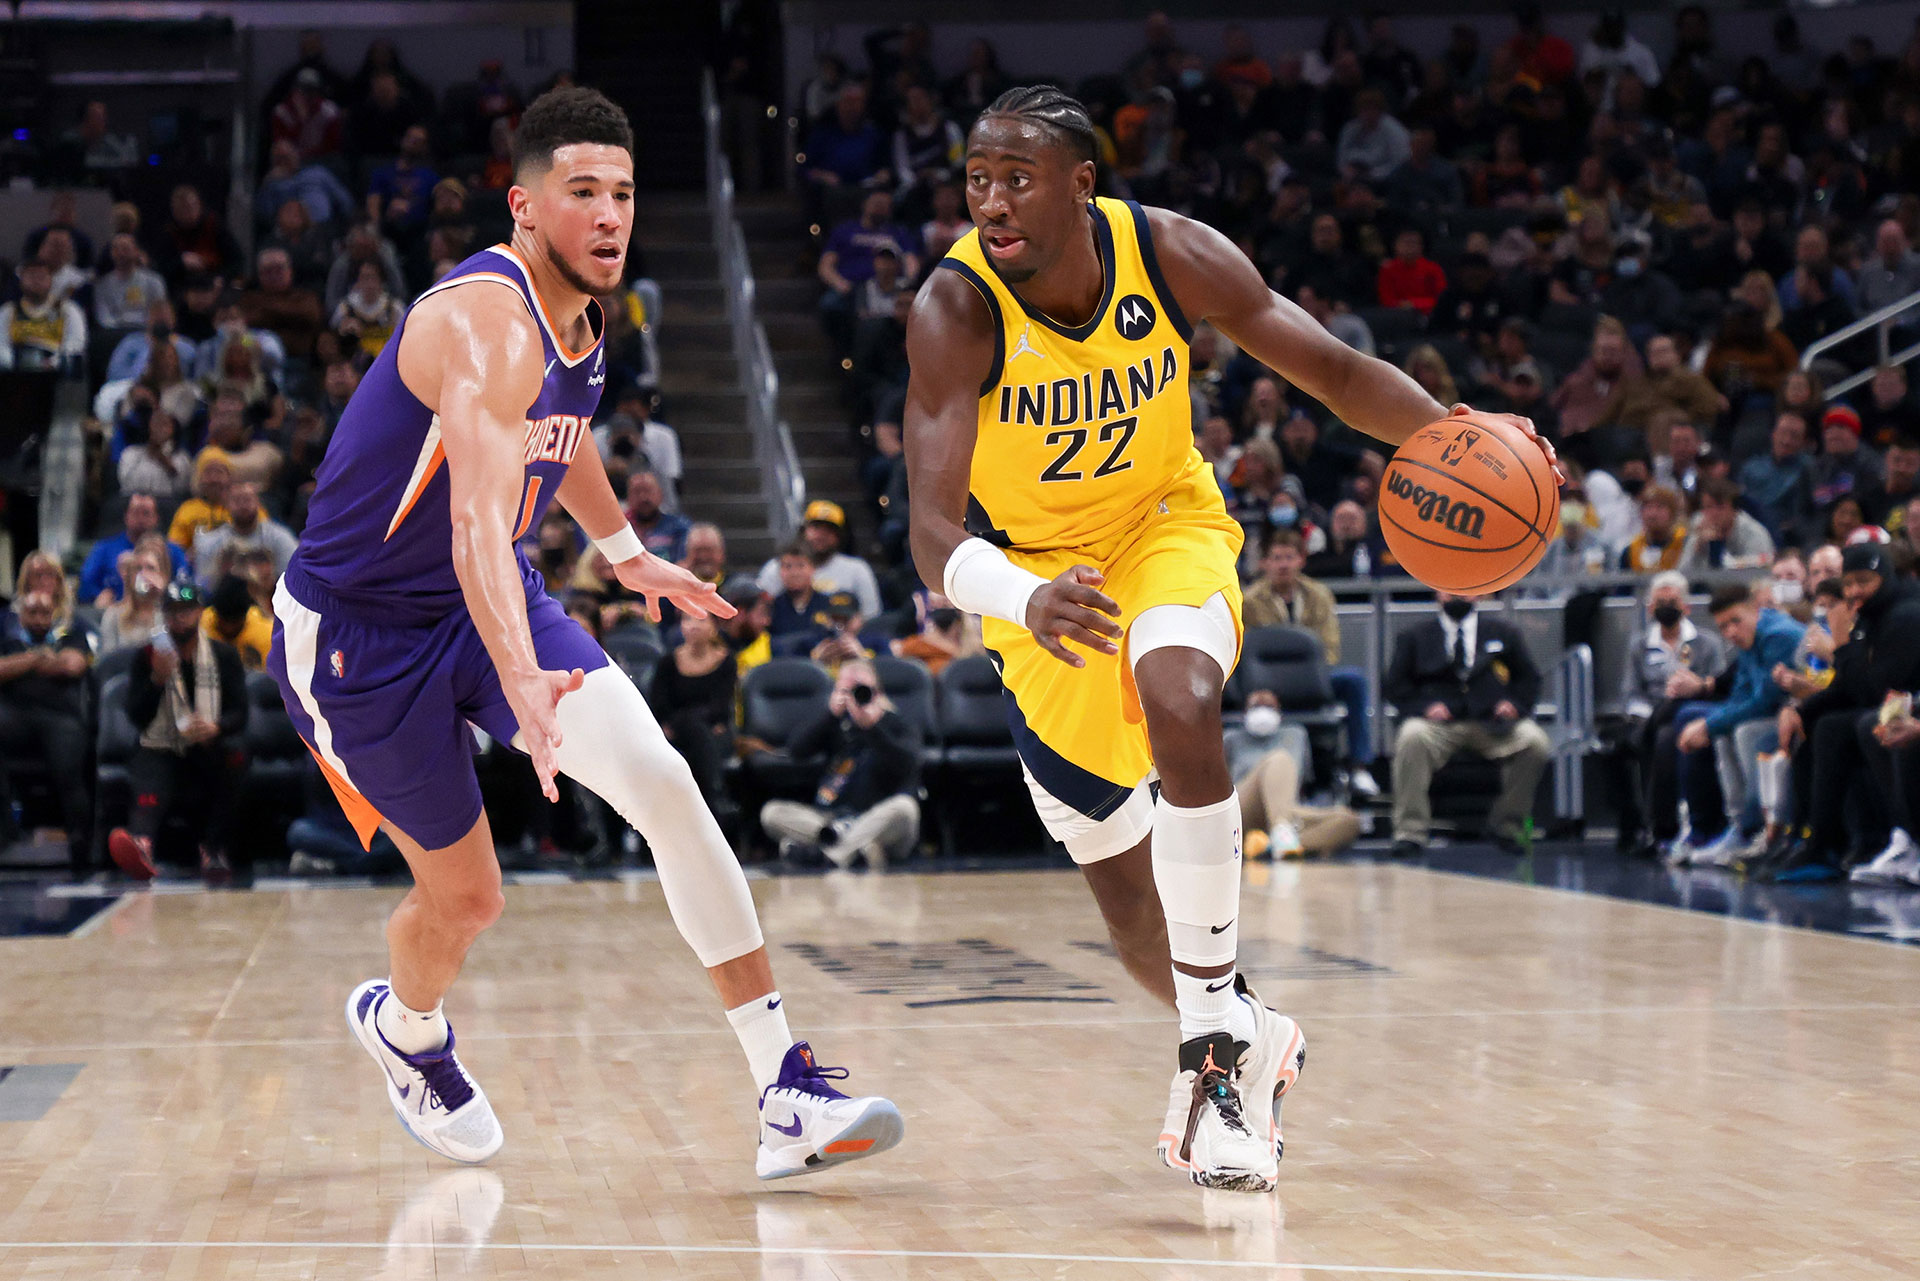 Caris LeVert #22 of the Indiana Pacers dribbles the ball while being guarded by Devin Booker #1